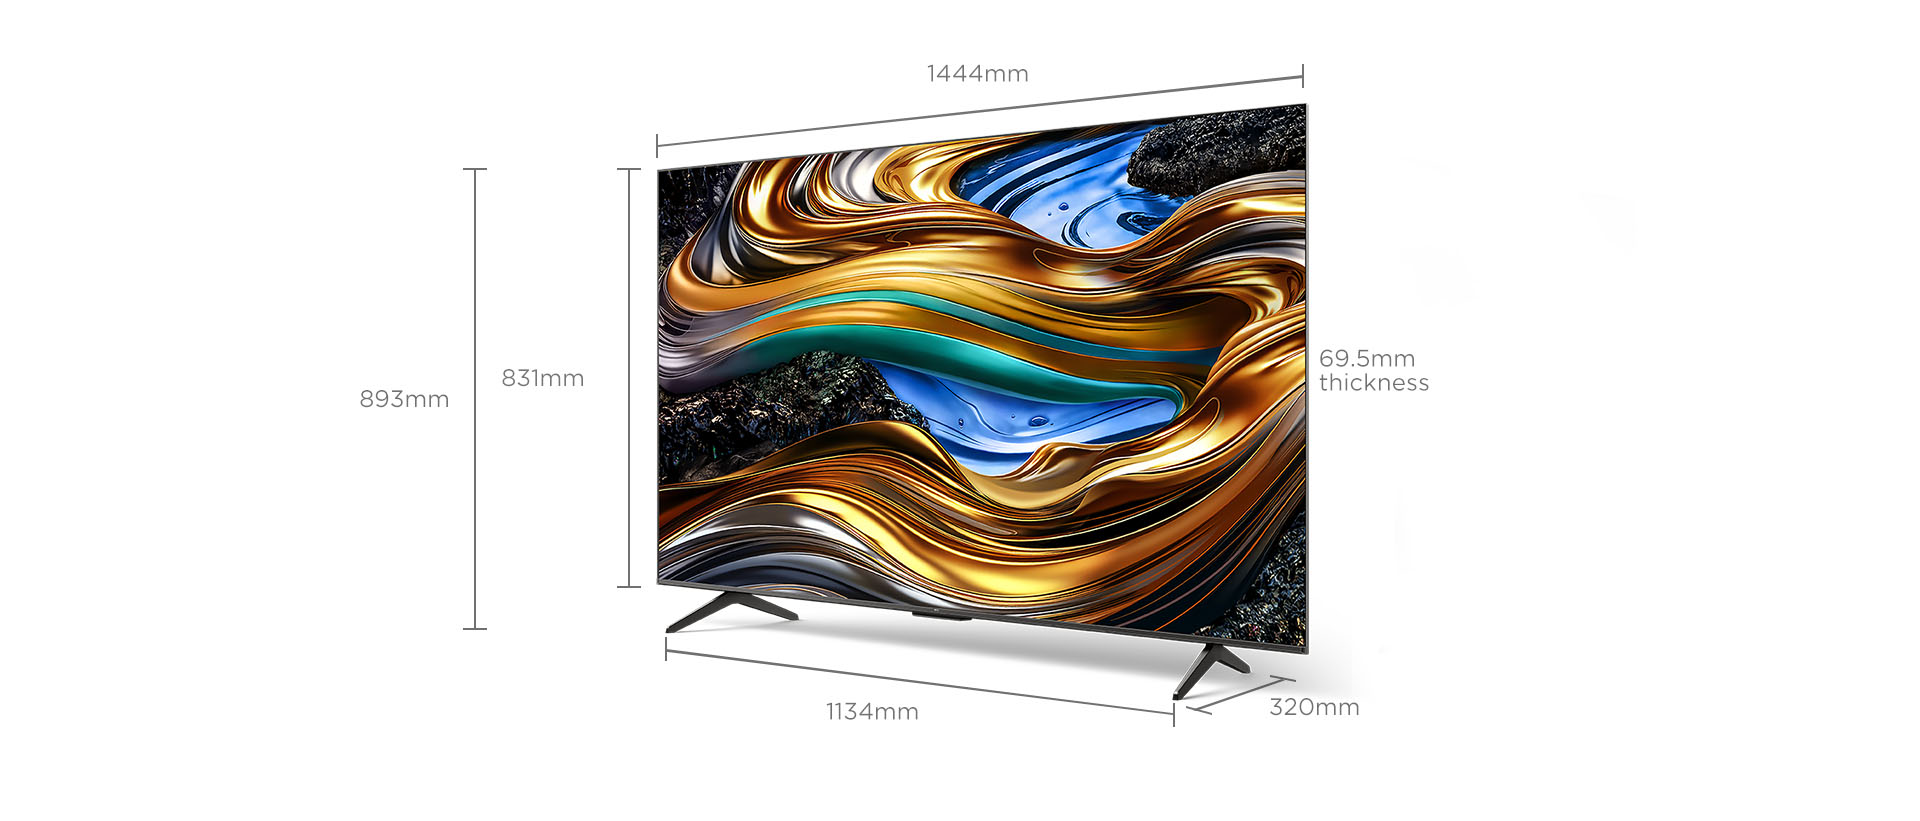 65 inch TCL P755 Smart TV